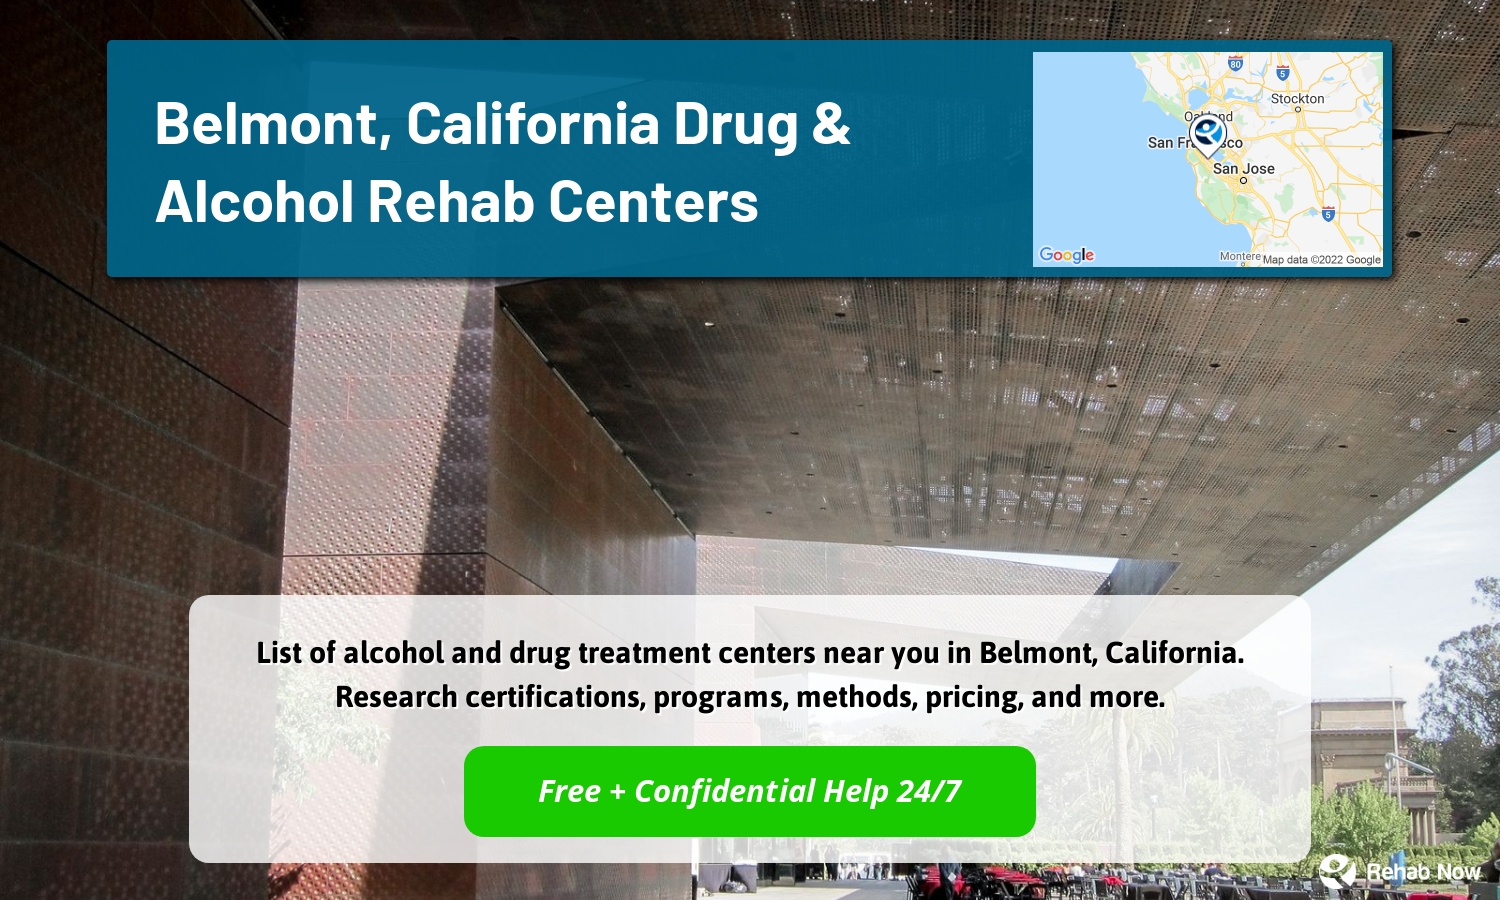 List of alcohol and drug treatment centers near you in Belmont, California. Research certifications, programs, methods, pricing, and more.